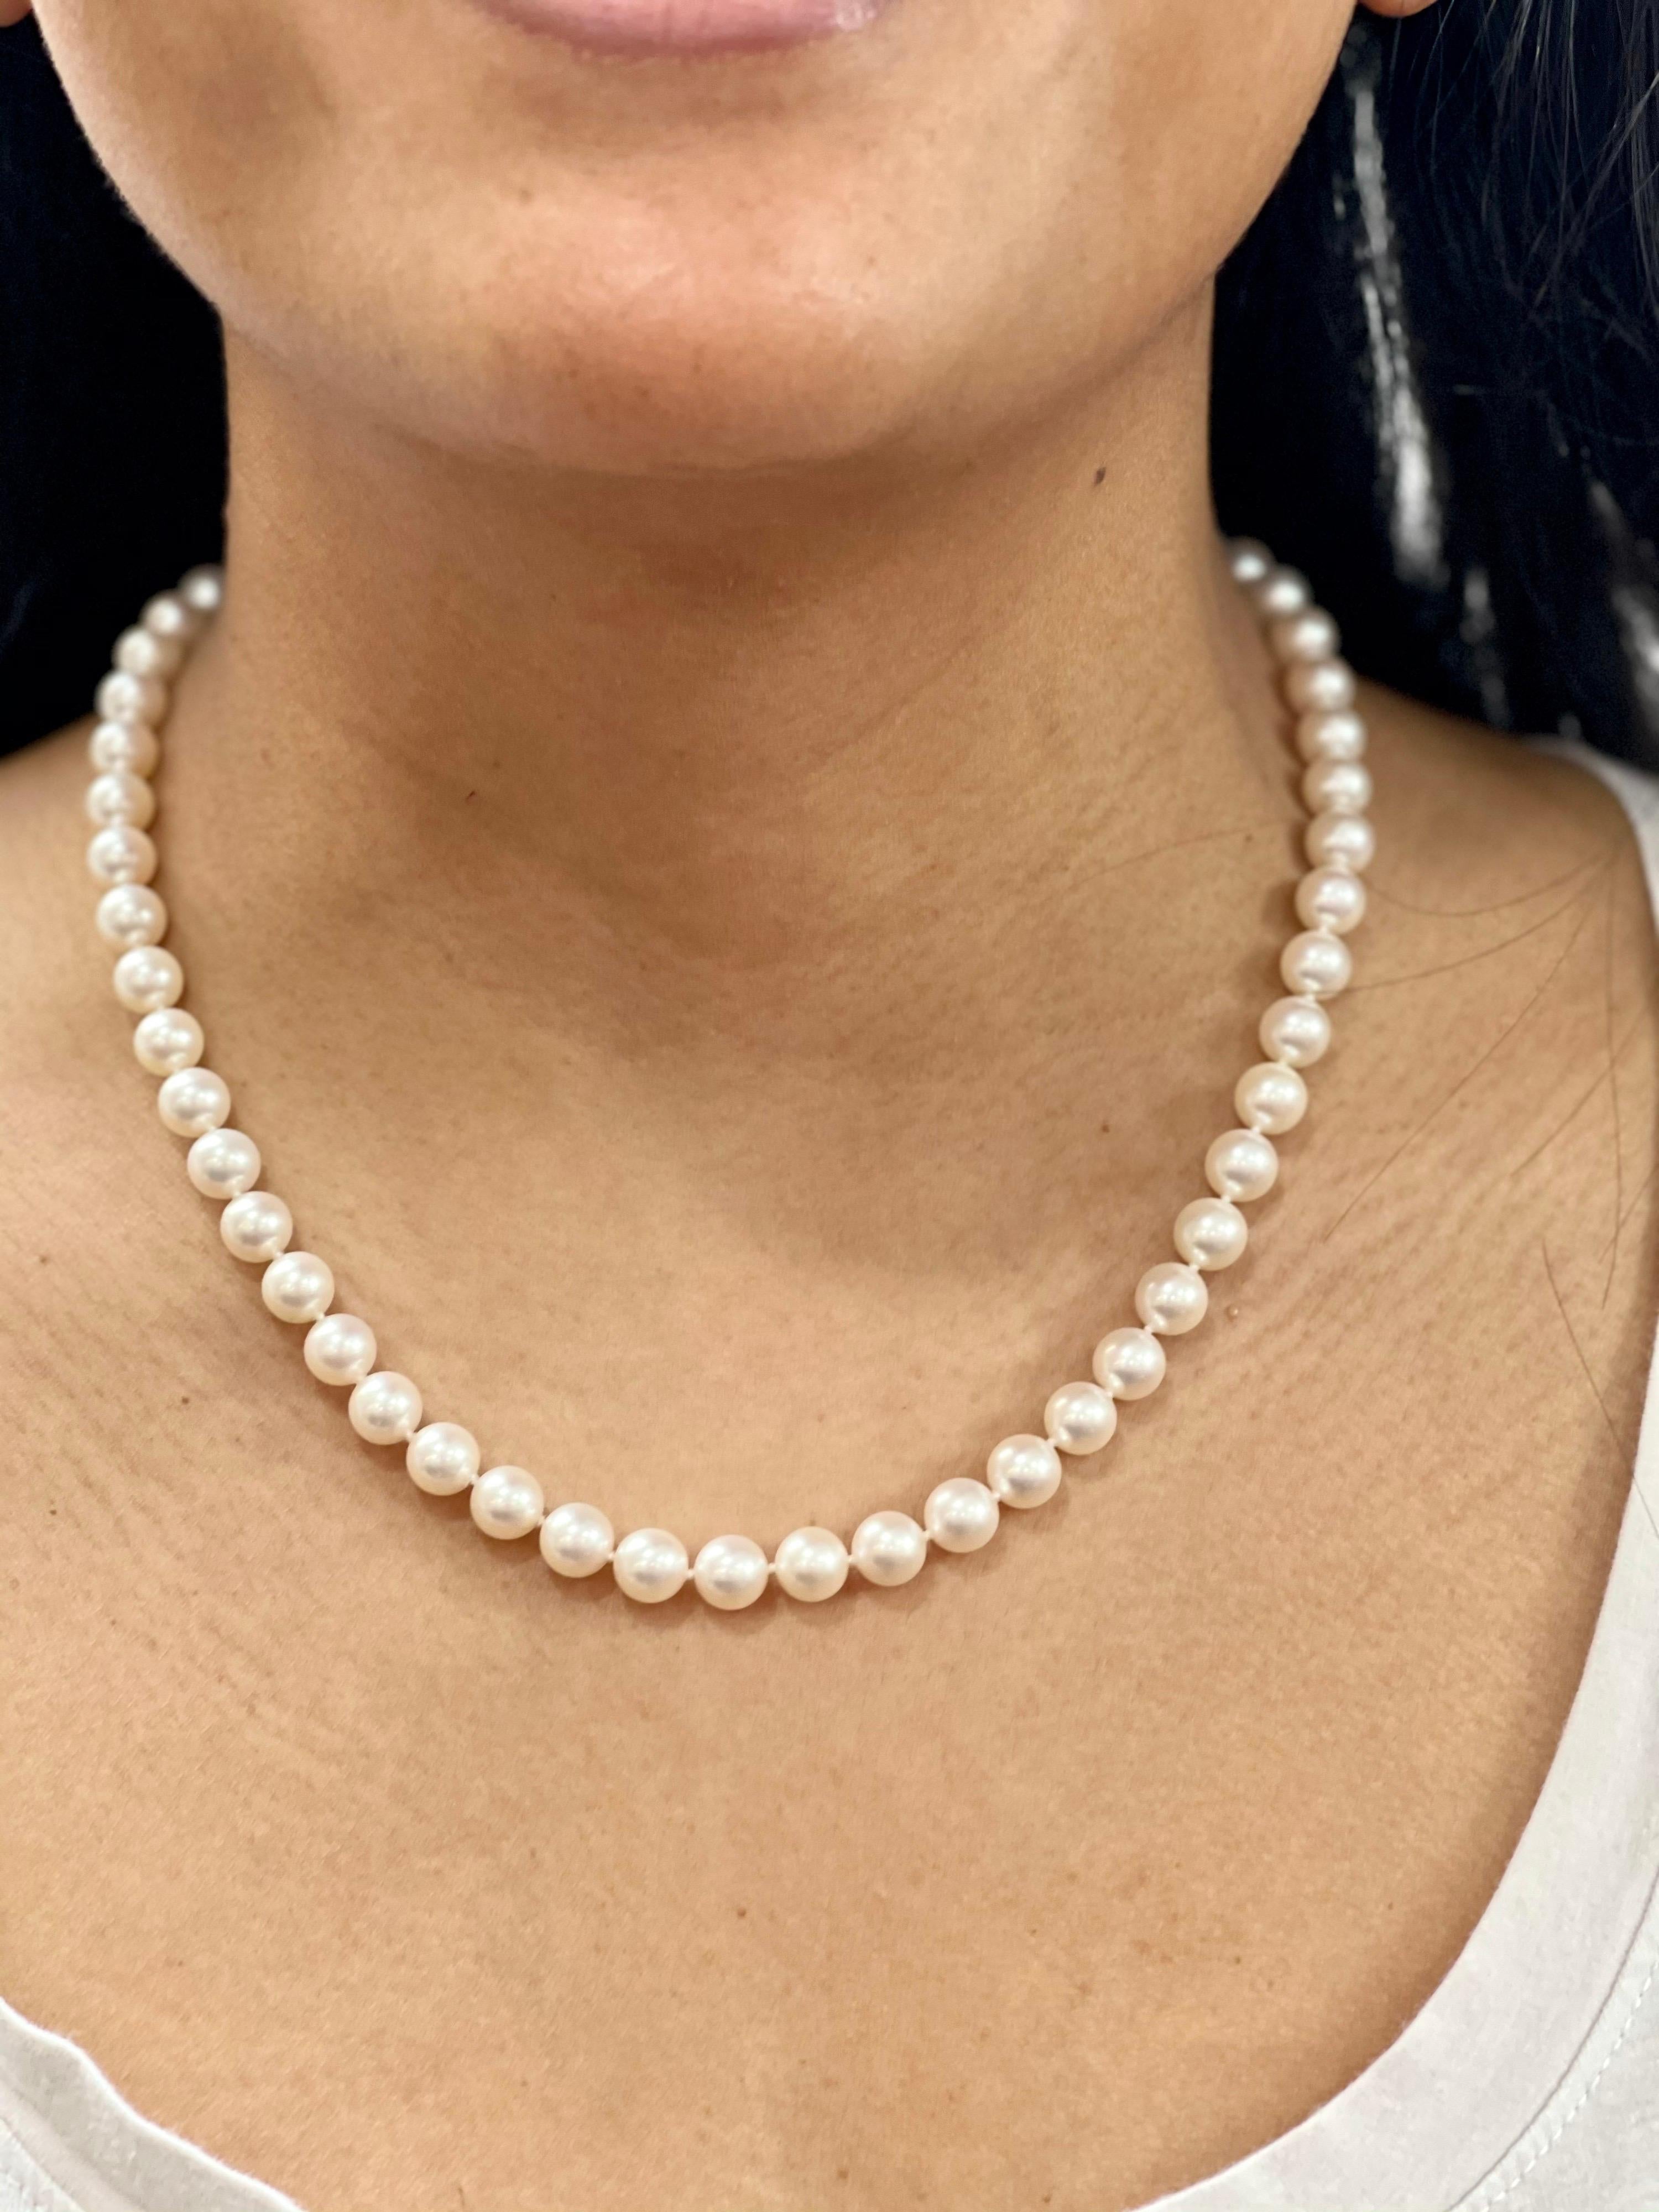 Blue Lagoon® by Mikimoto 6.5 - 7.0mm Cultured Akoya Pearl Strand Necklace  with 14K Gold Clasp - 22